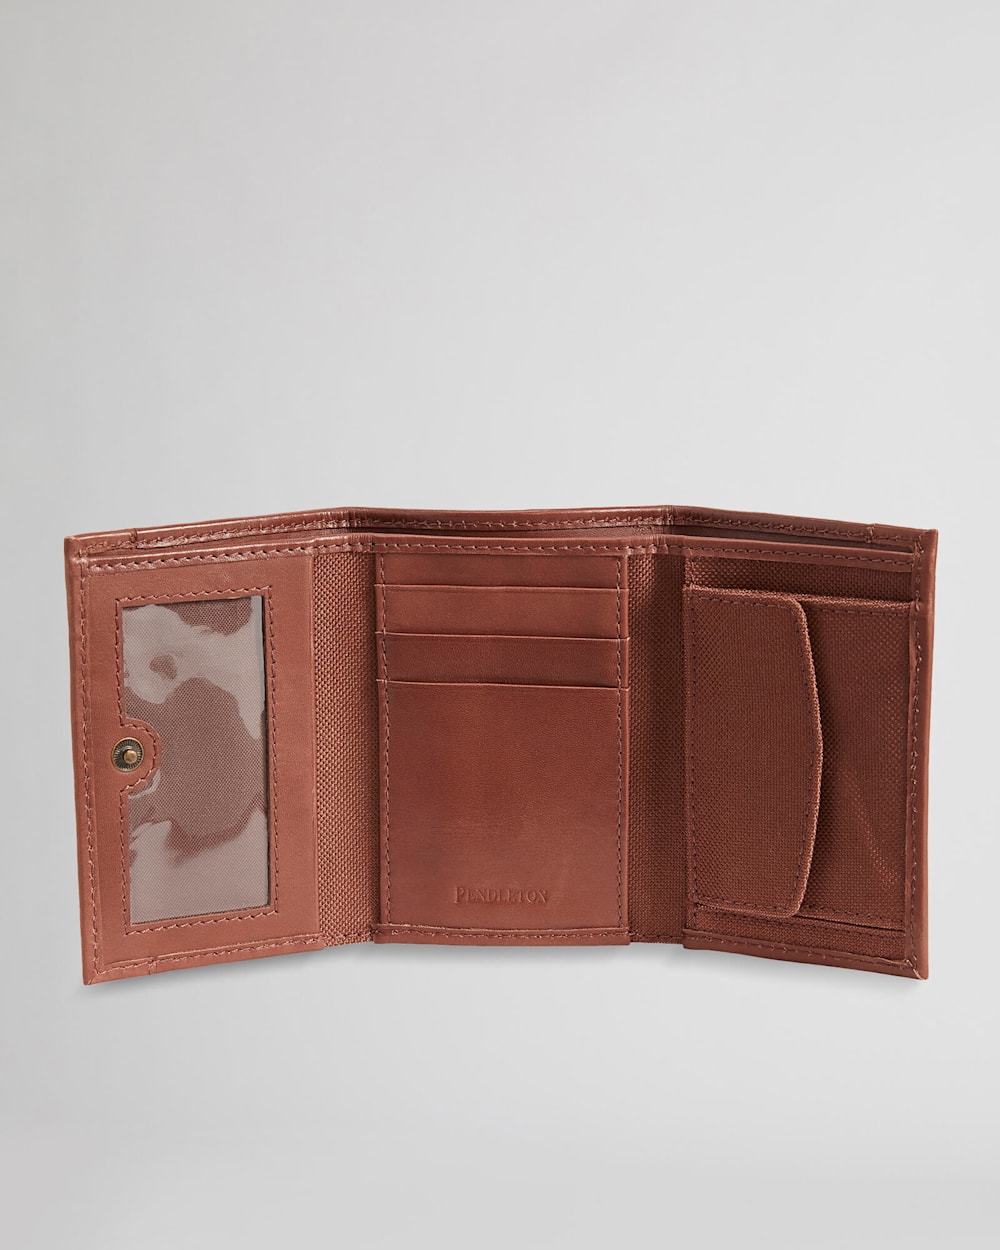 ALTERNATE VIEW OF TRIFOLD WALLET IN BROWN MISSION TRAILS image number 3